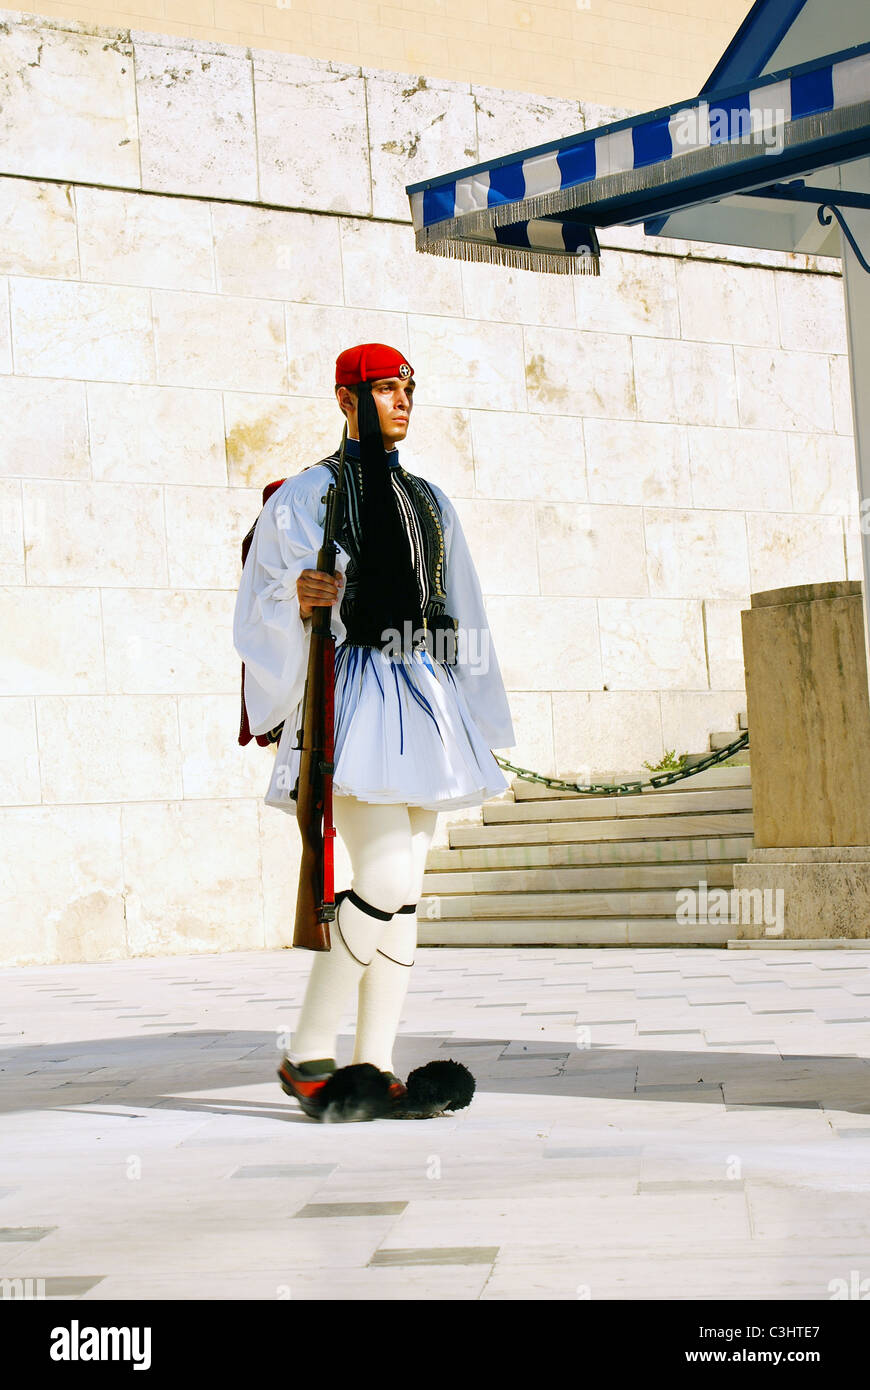 ATHENS, GREECE - June 17: Evzones sitting on guard in front of the Greek Parliament on June 17, 2007 in Athens, Greece. Stock Photo